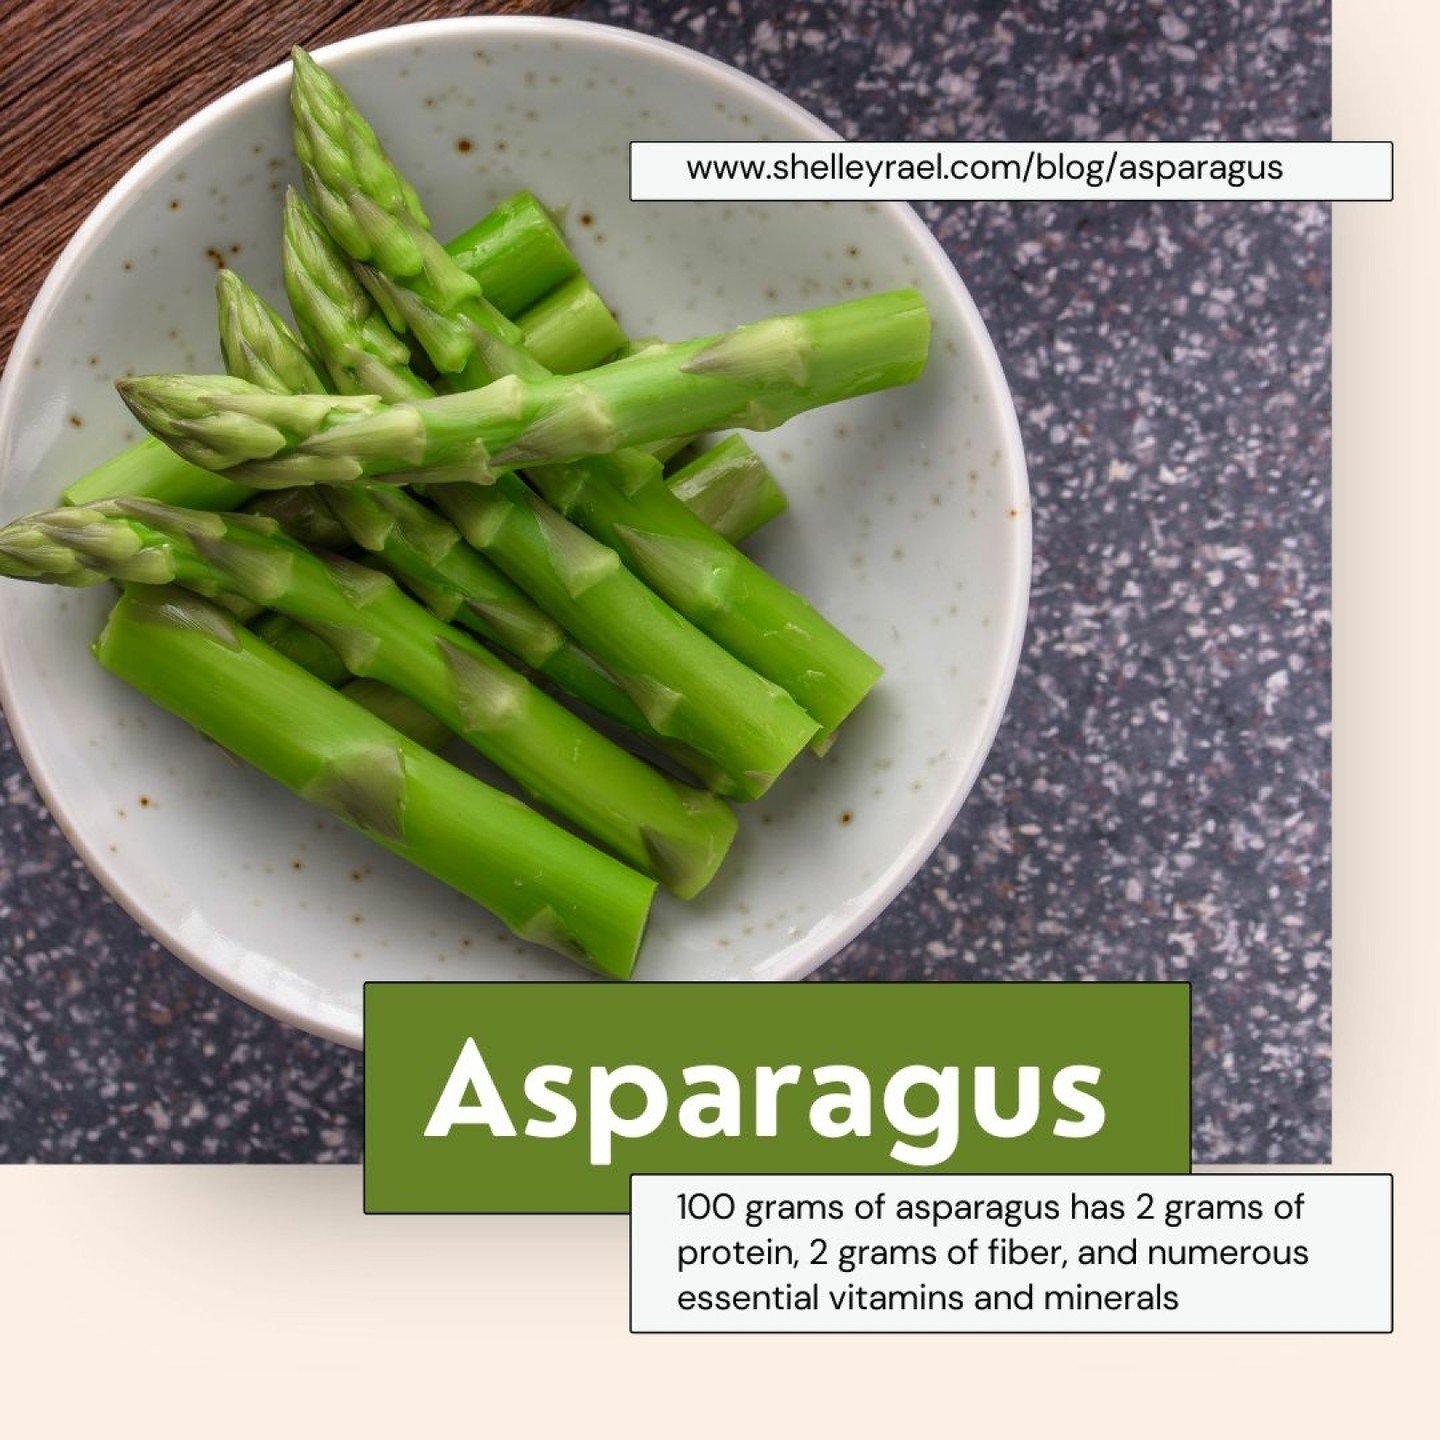 🌱 Asparagus! 

🌱Did you know that just 100 grams of asparagus has 2 grams of protein, 2 grams of fiber, and numerous essential vitamins and minerals? 

🌱From potassium to folate, it's a nutrient powerhouse! 

🌱Plus, with only 20 calories per serv